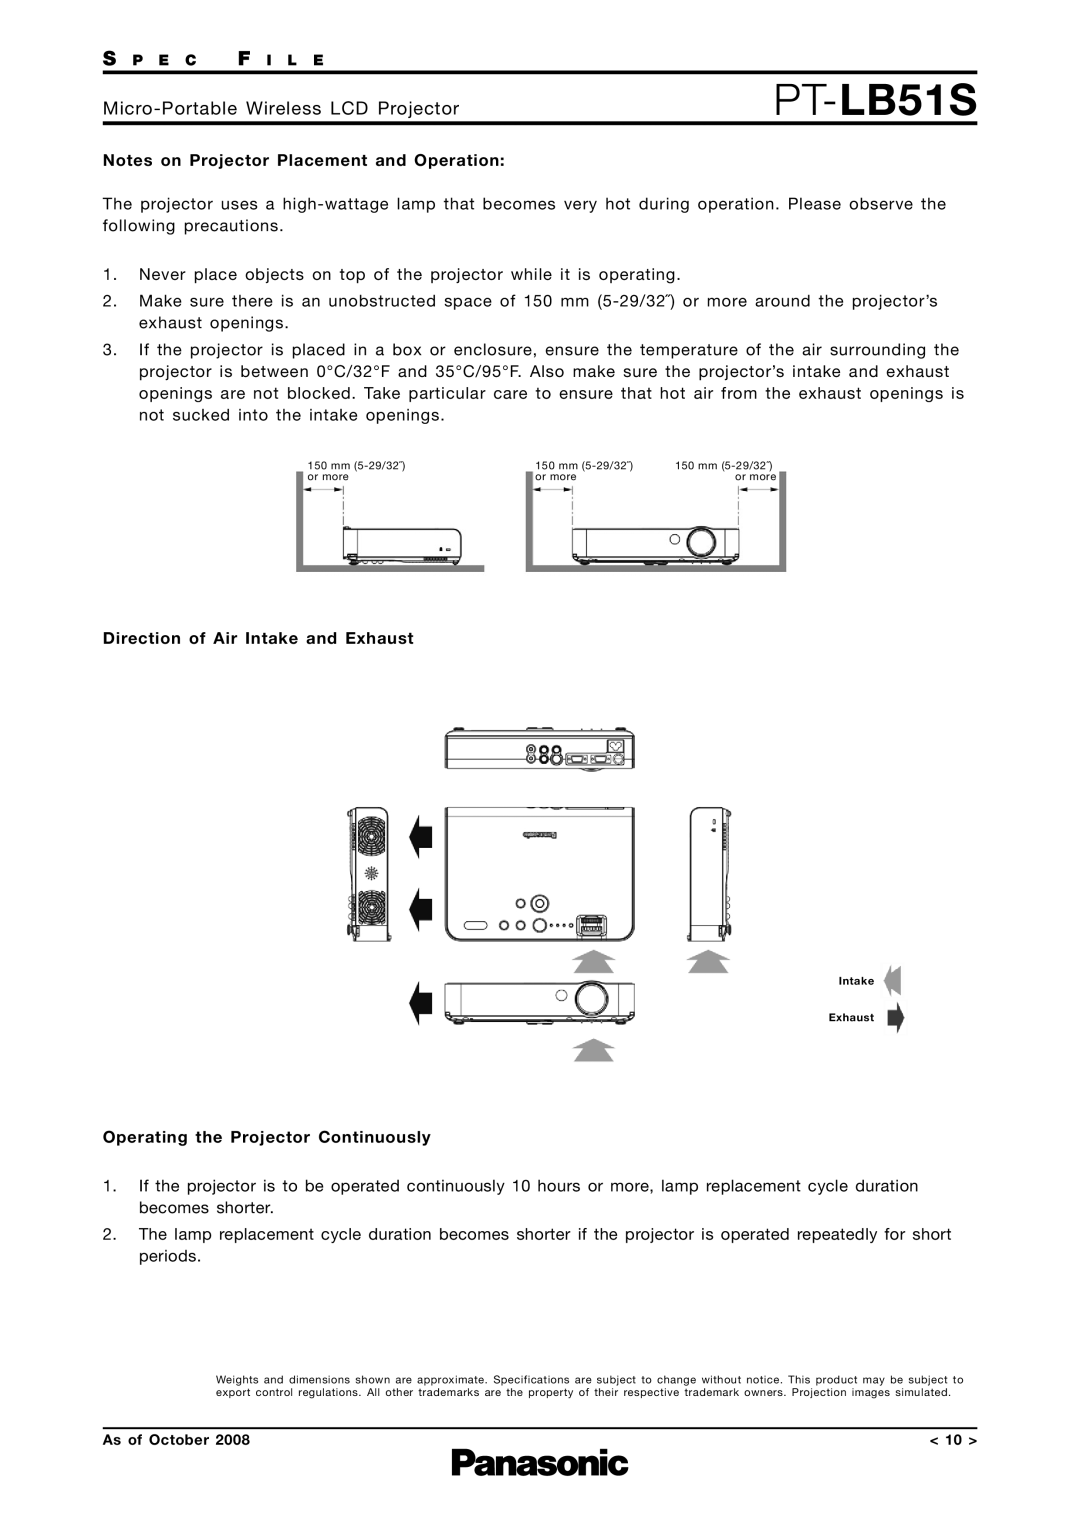 Panasonic PT-LB51S specifications Notes on Projector Placement and Operation, Direction of Air Intake and Exhaust 